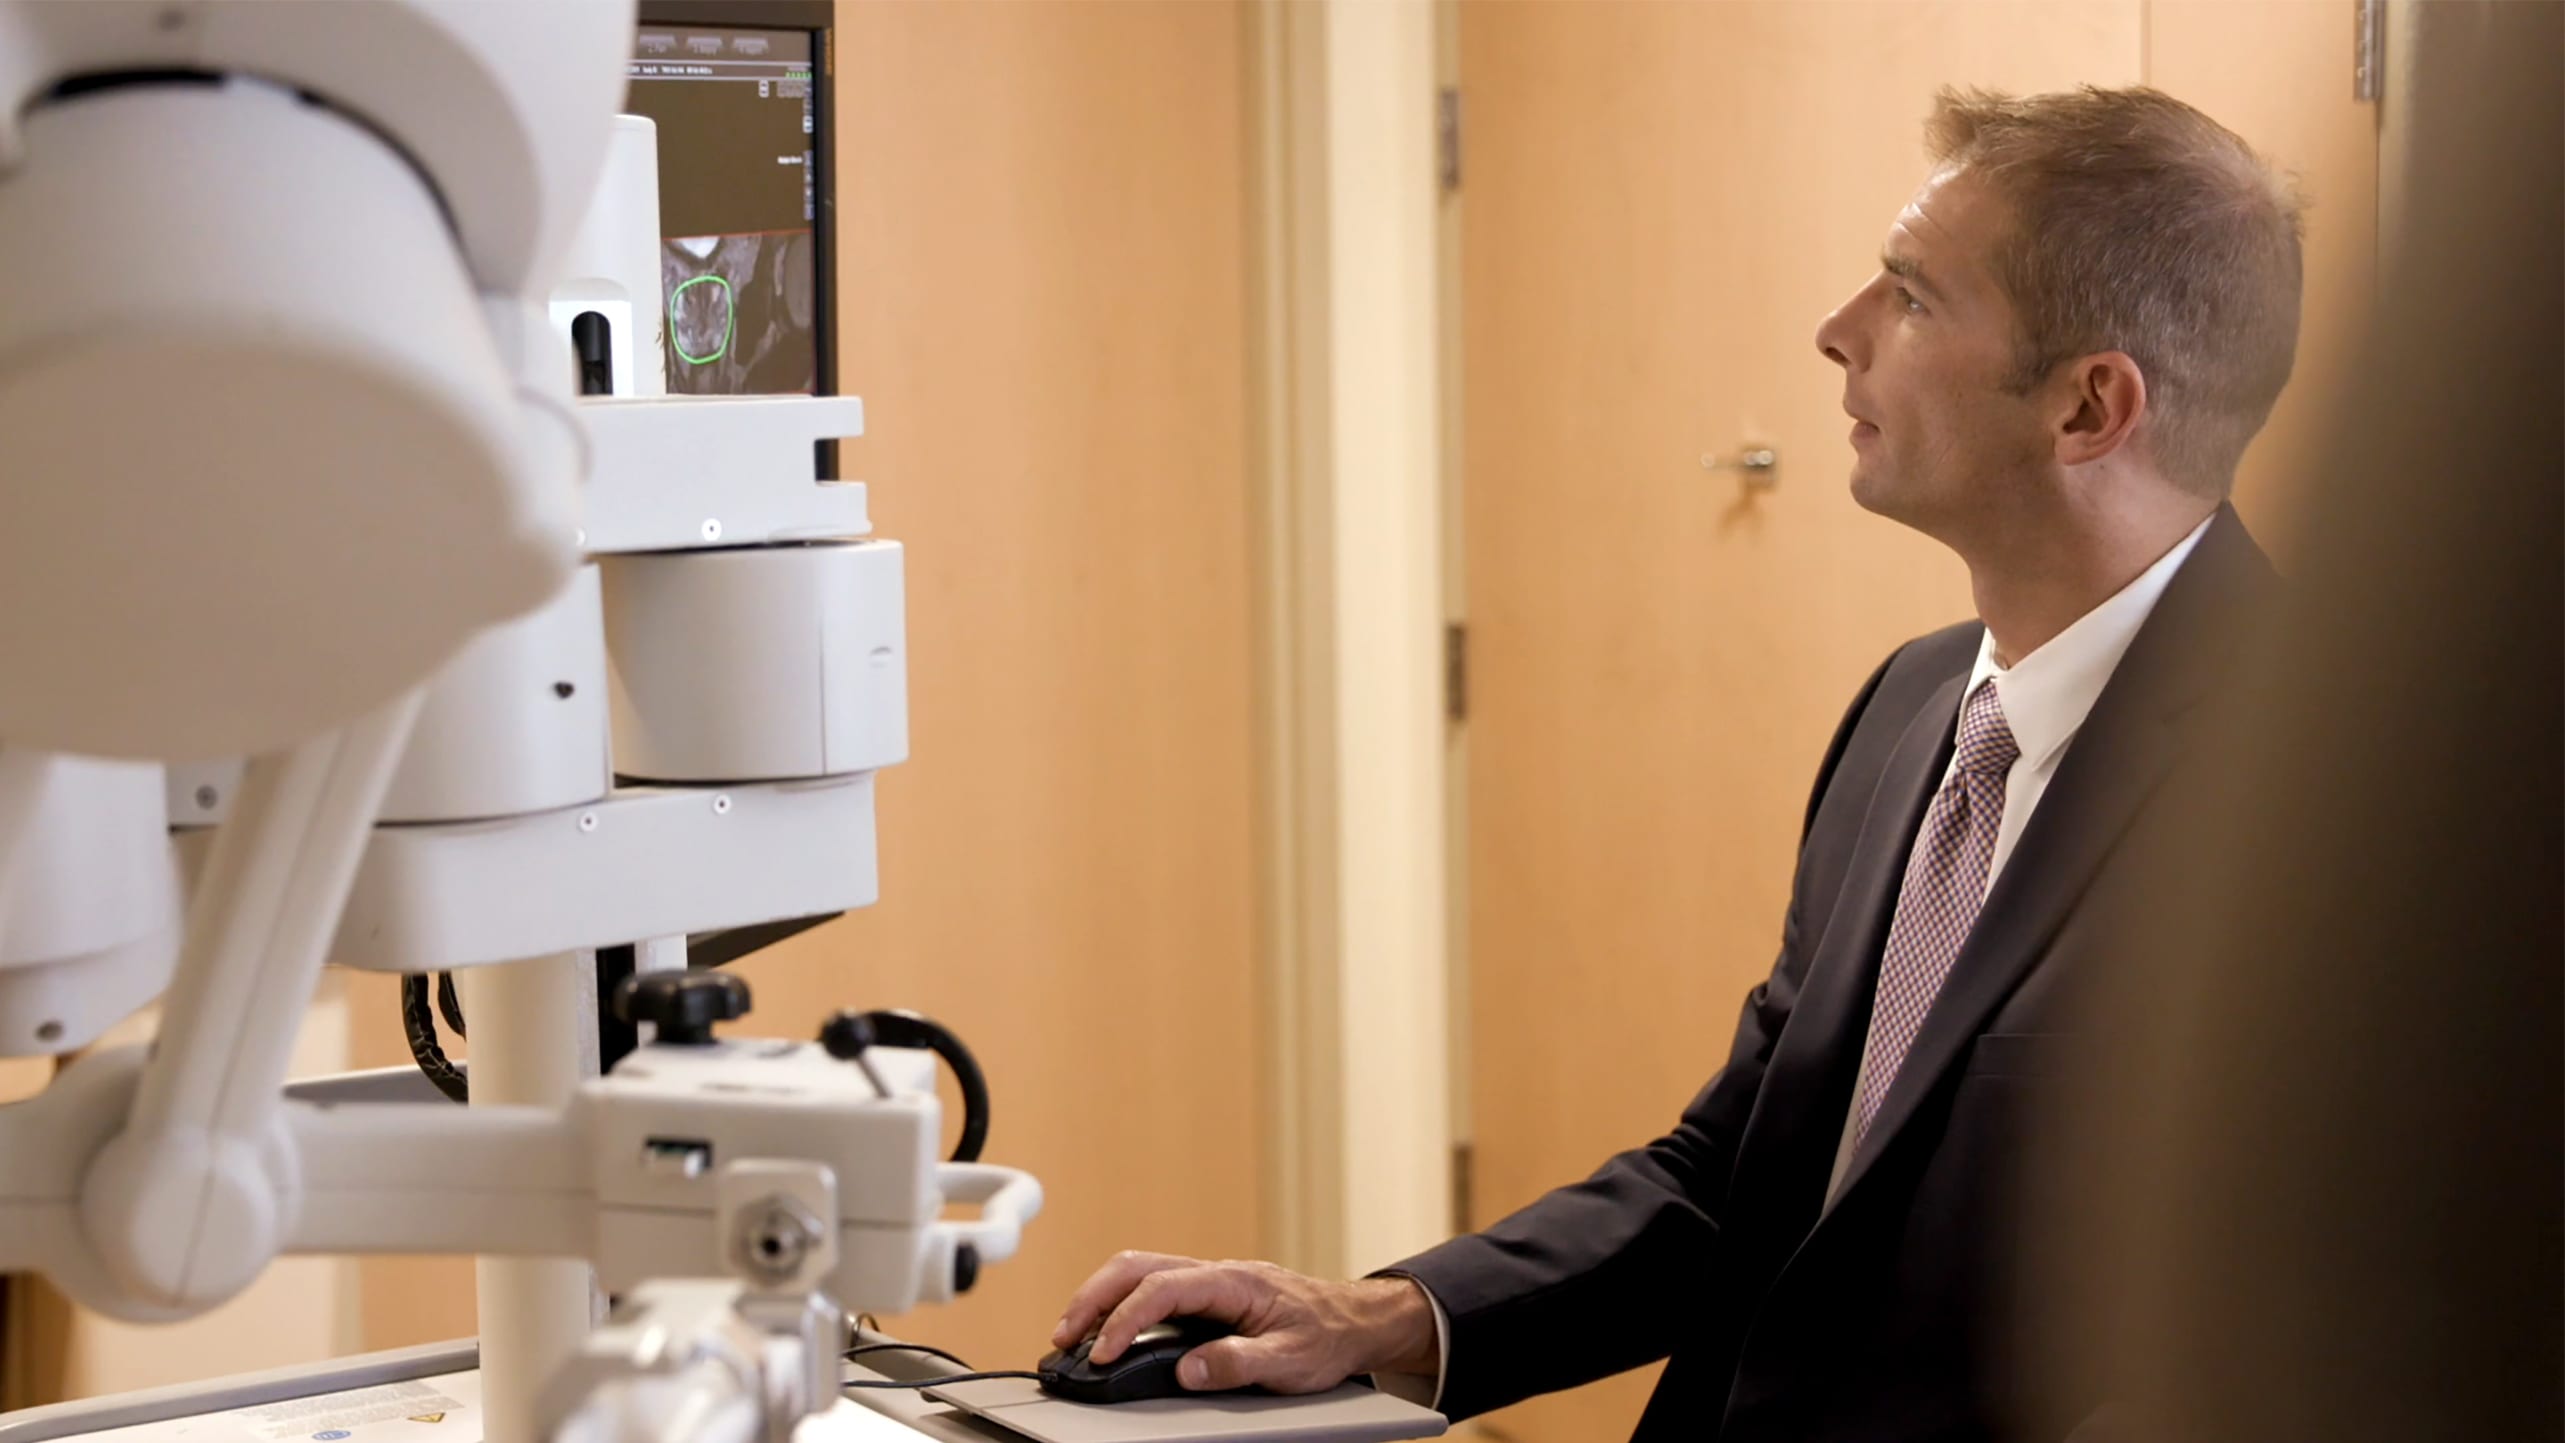 A doctor examines imaging to detect prostate cancer.